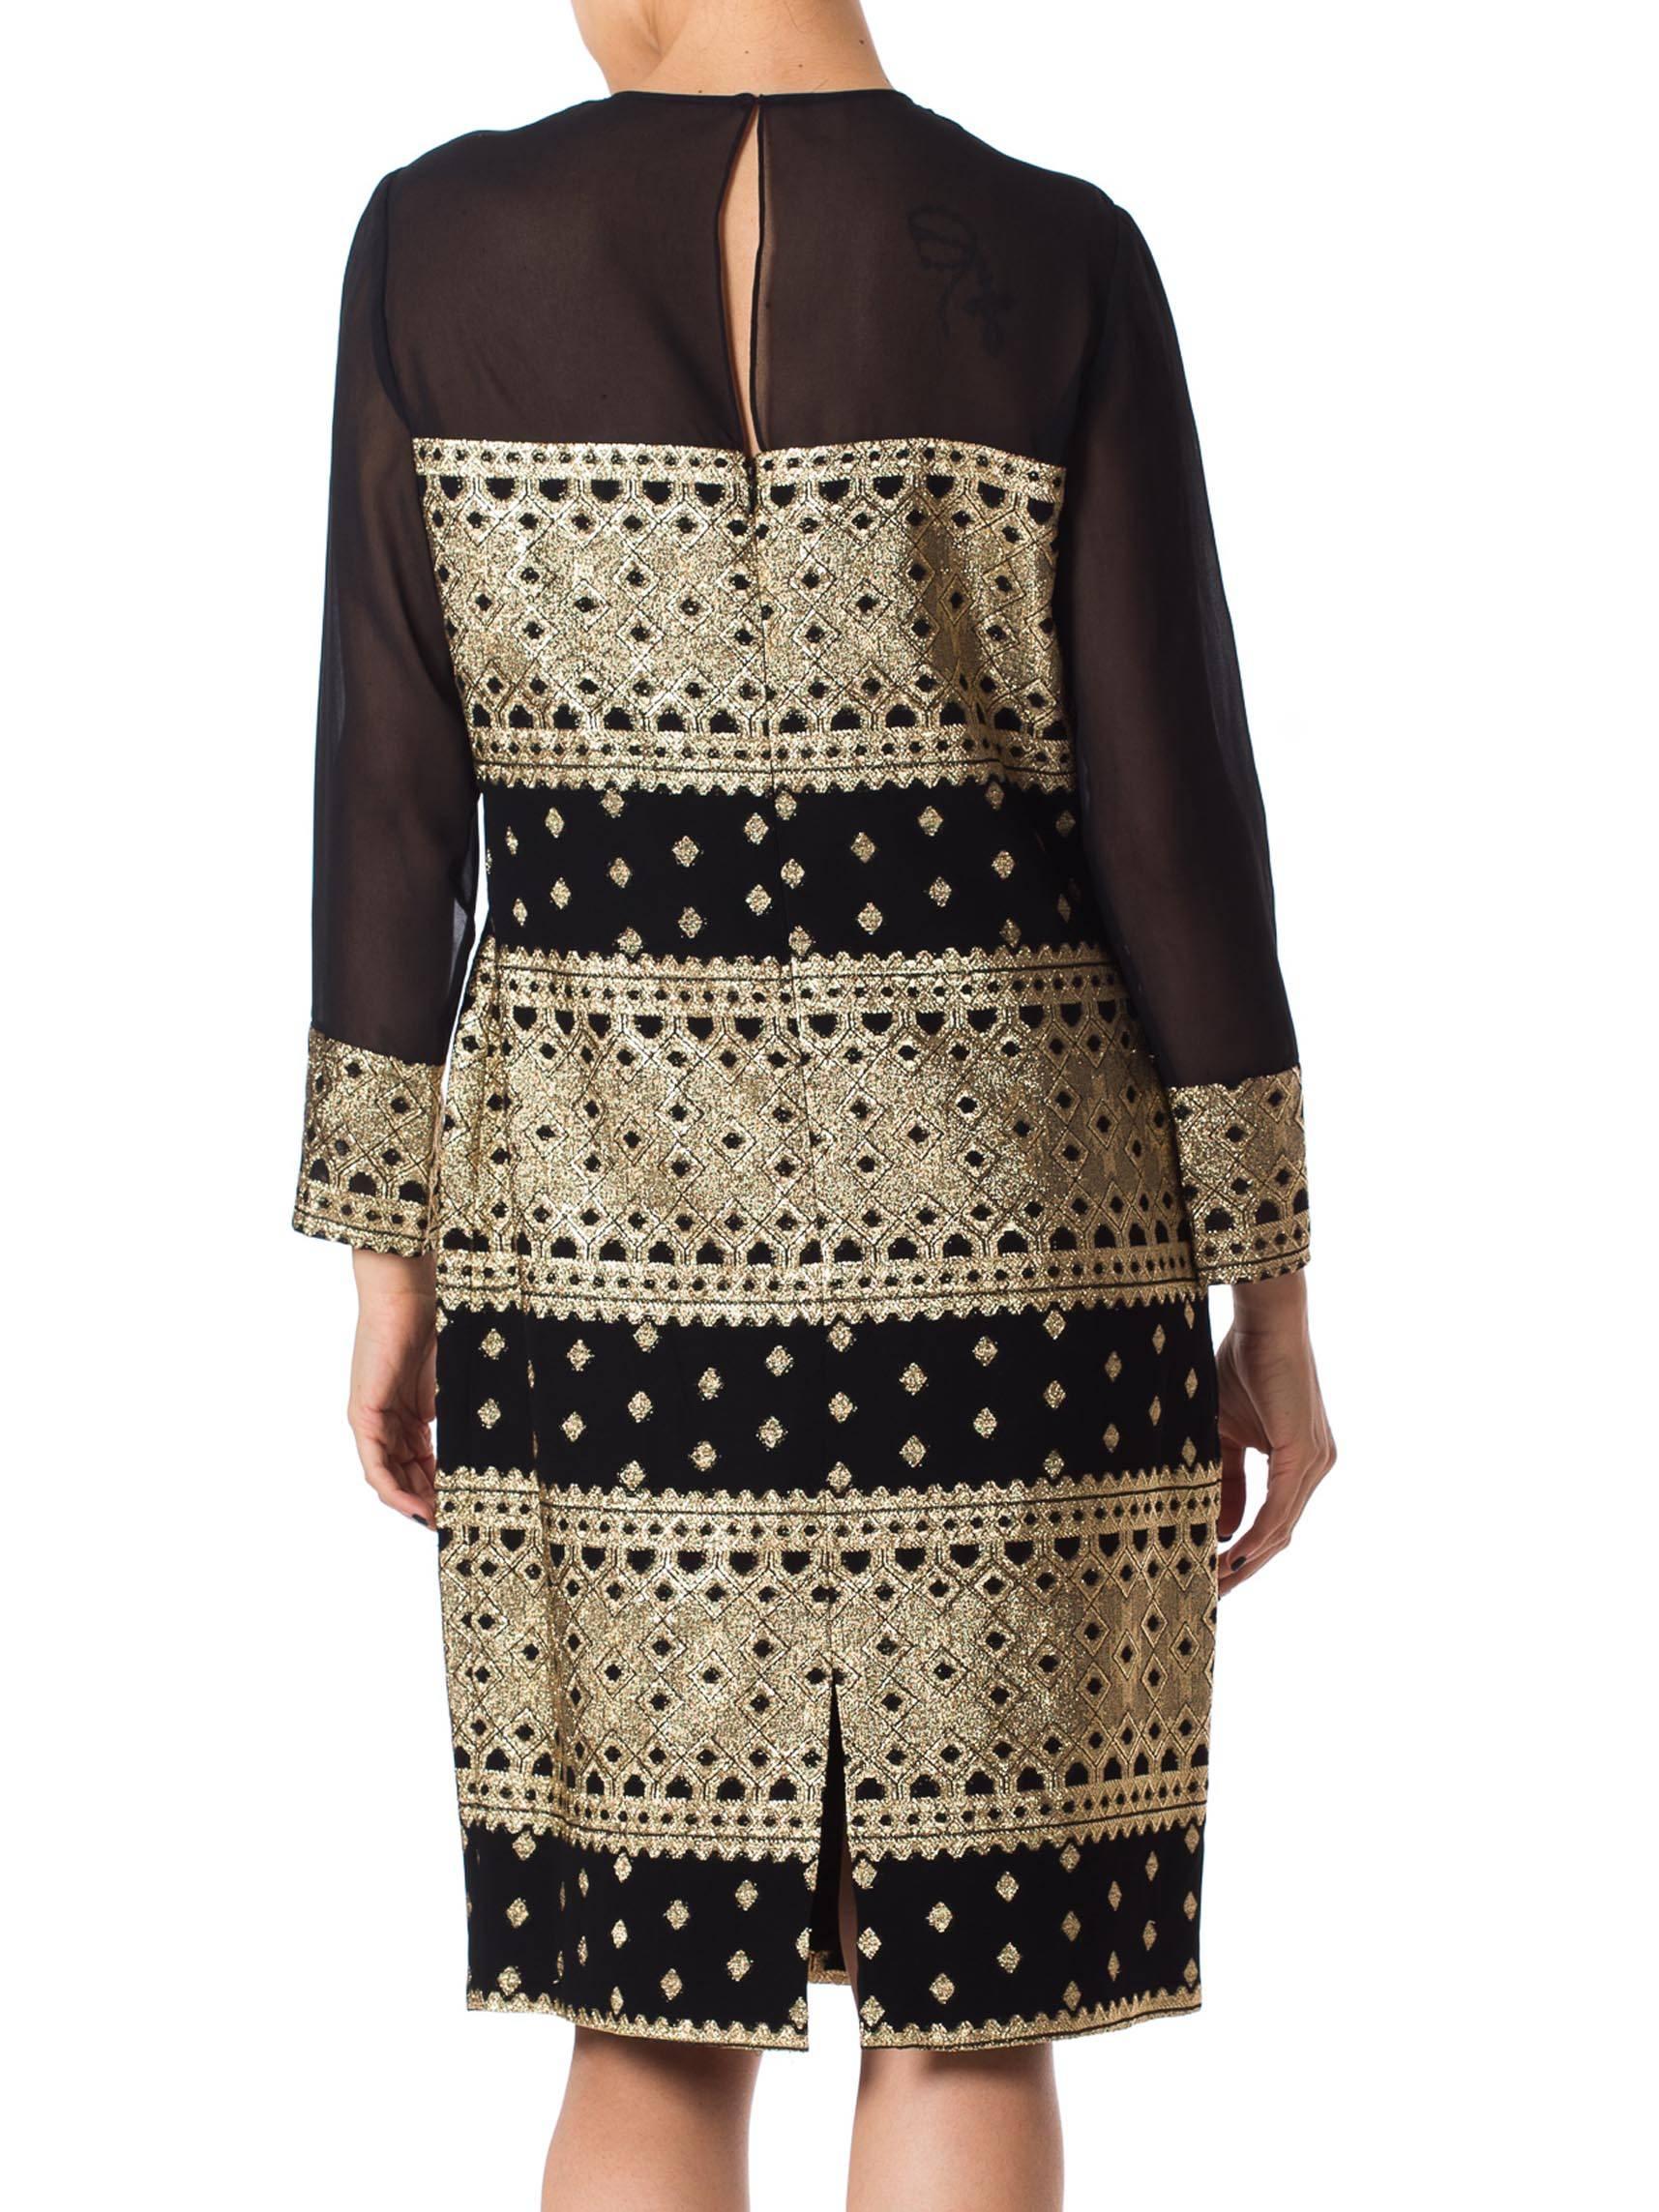 Women's Arnold Scassi Coctail Dress